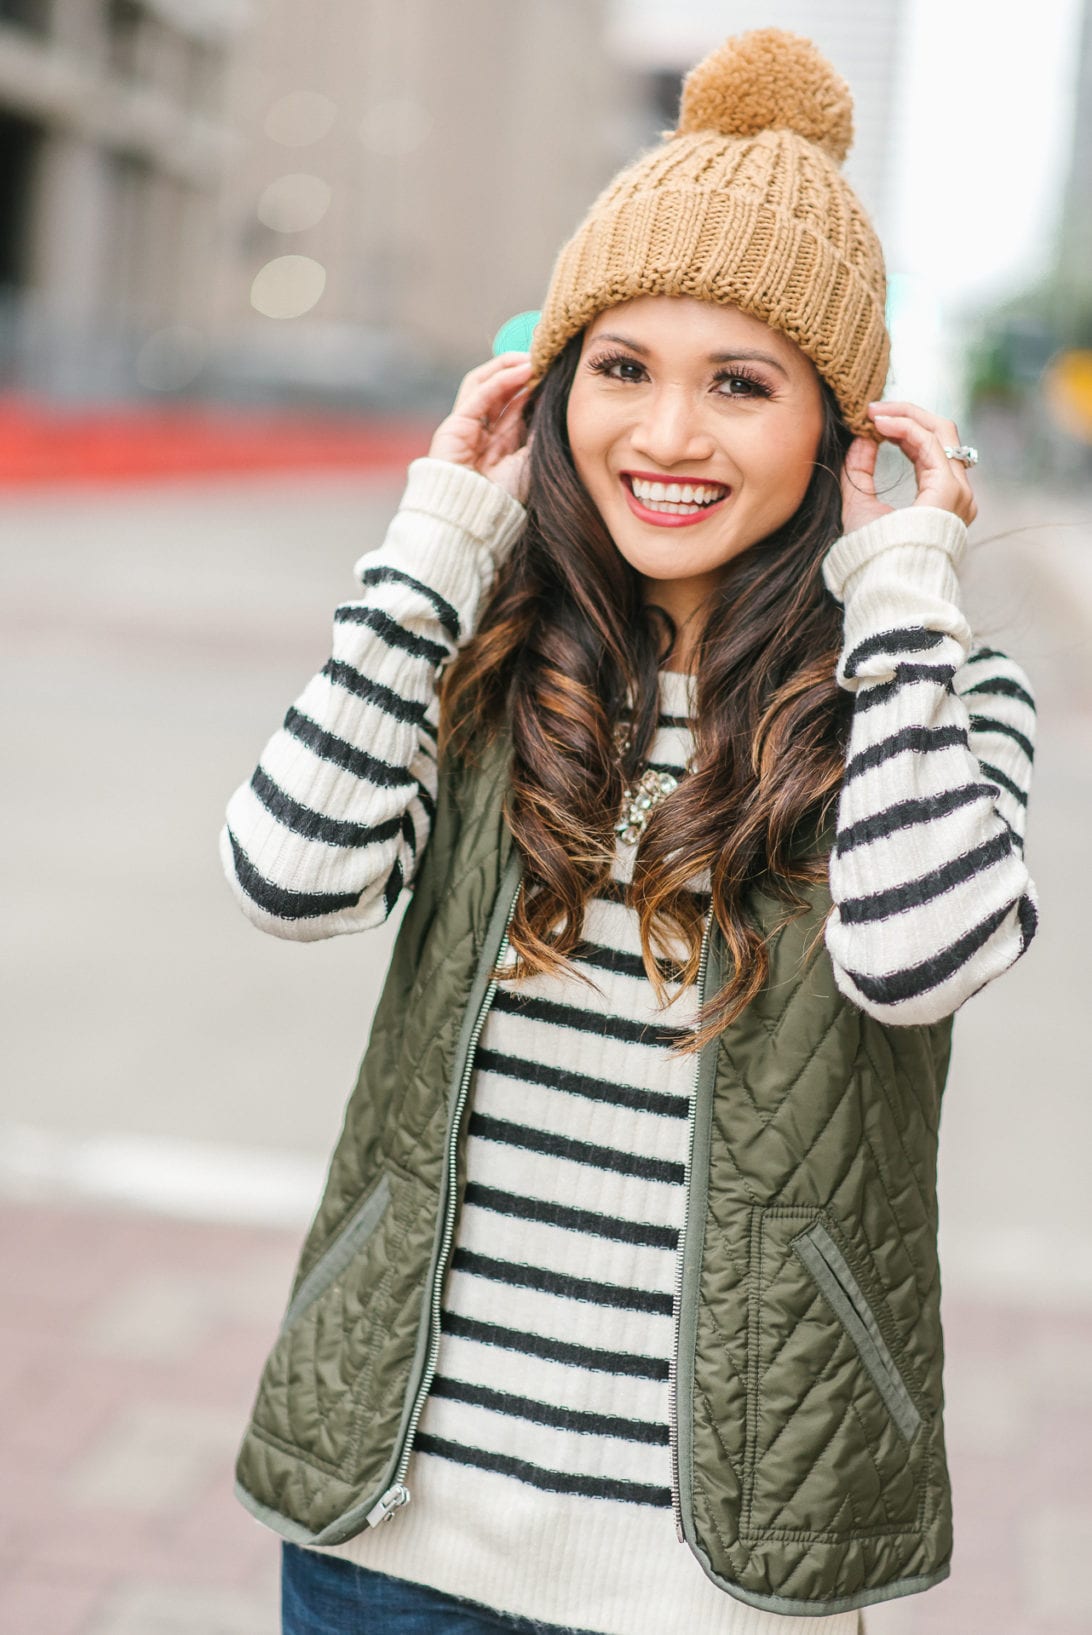 old navy, old navy clothes, old navy style, #holiyay, #oldnavystyle, family style, winter style, snow outfit, winter outfit, family outfits, family winter outfits, utility jacket, quilted vest, striped sweater, Cable-Knit Pom-Pom Beanie , pom pom. beanie, Jandon Bootie, muk luk, snow shoes, hiking boots, boy fashion, toddler fashion 